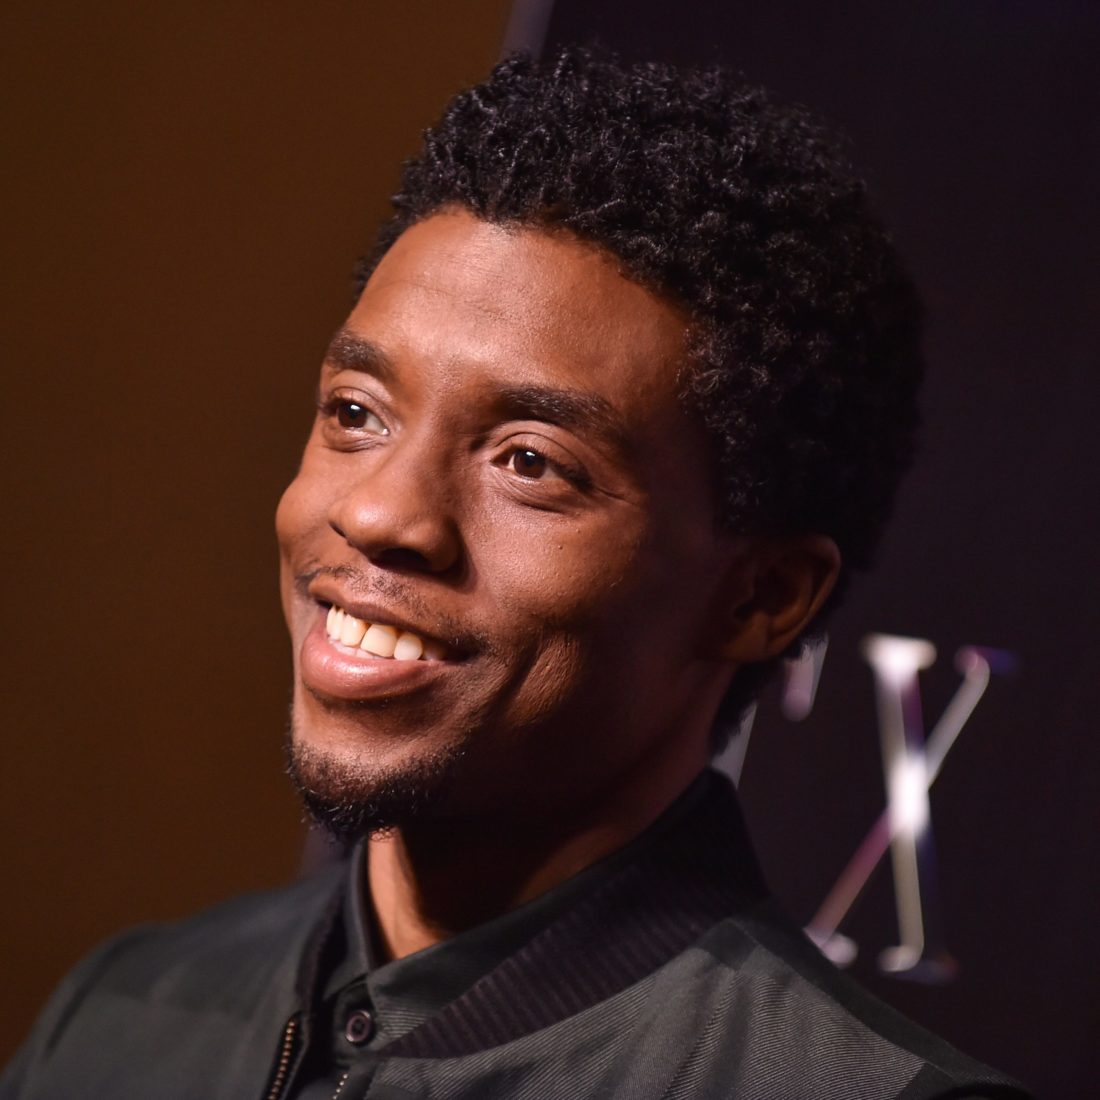 Chadwick Boseman smiling during red carpet event